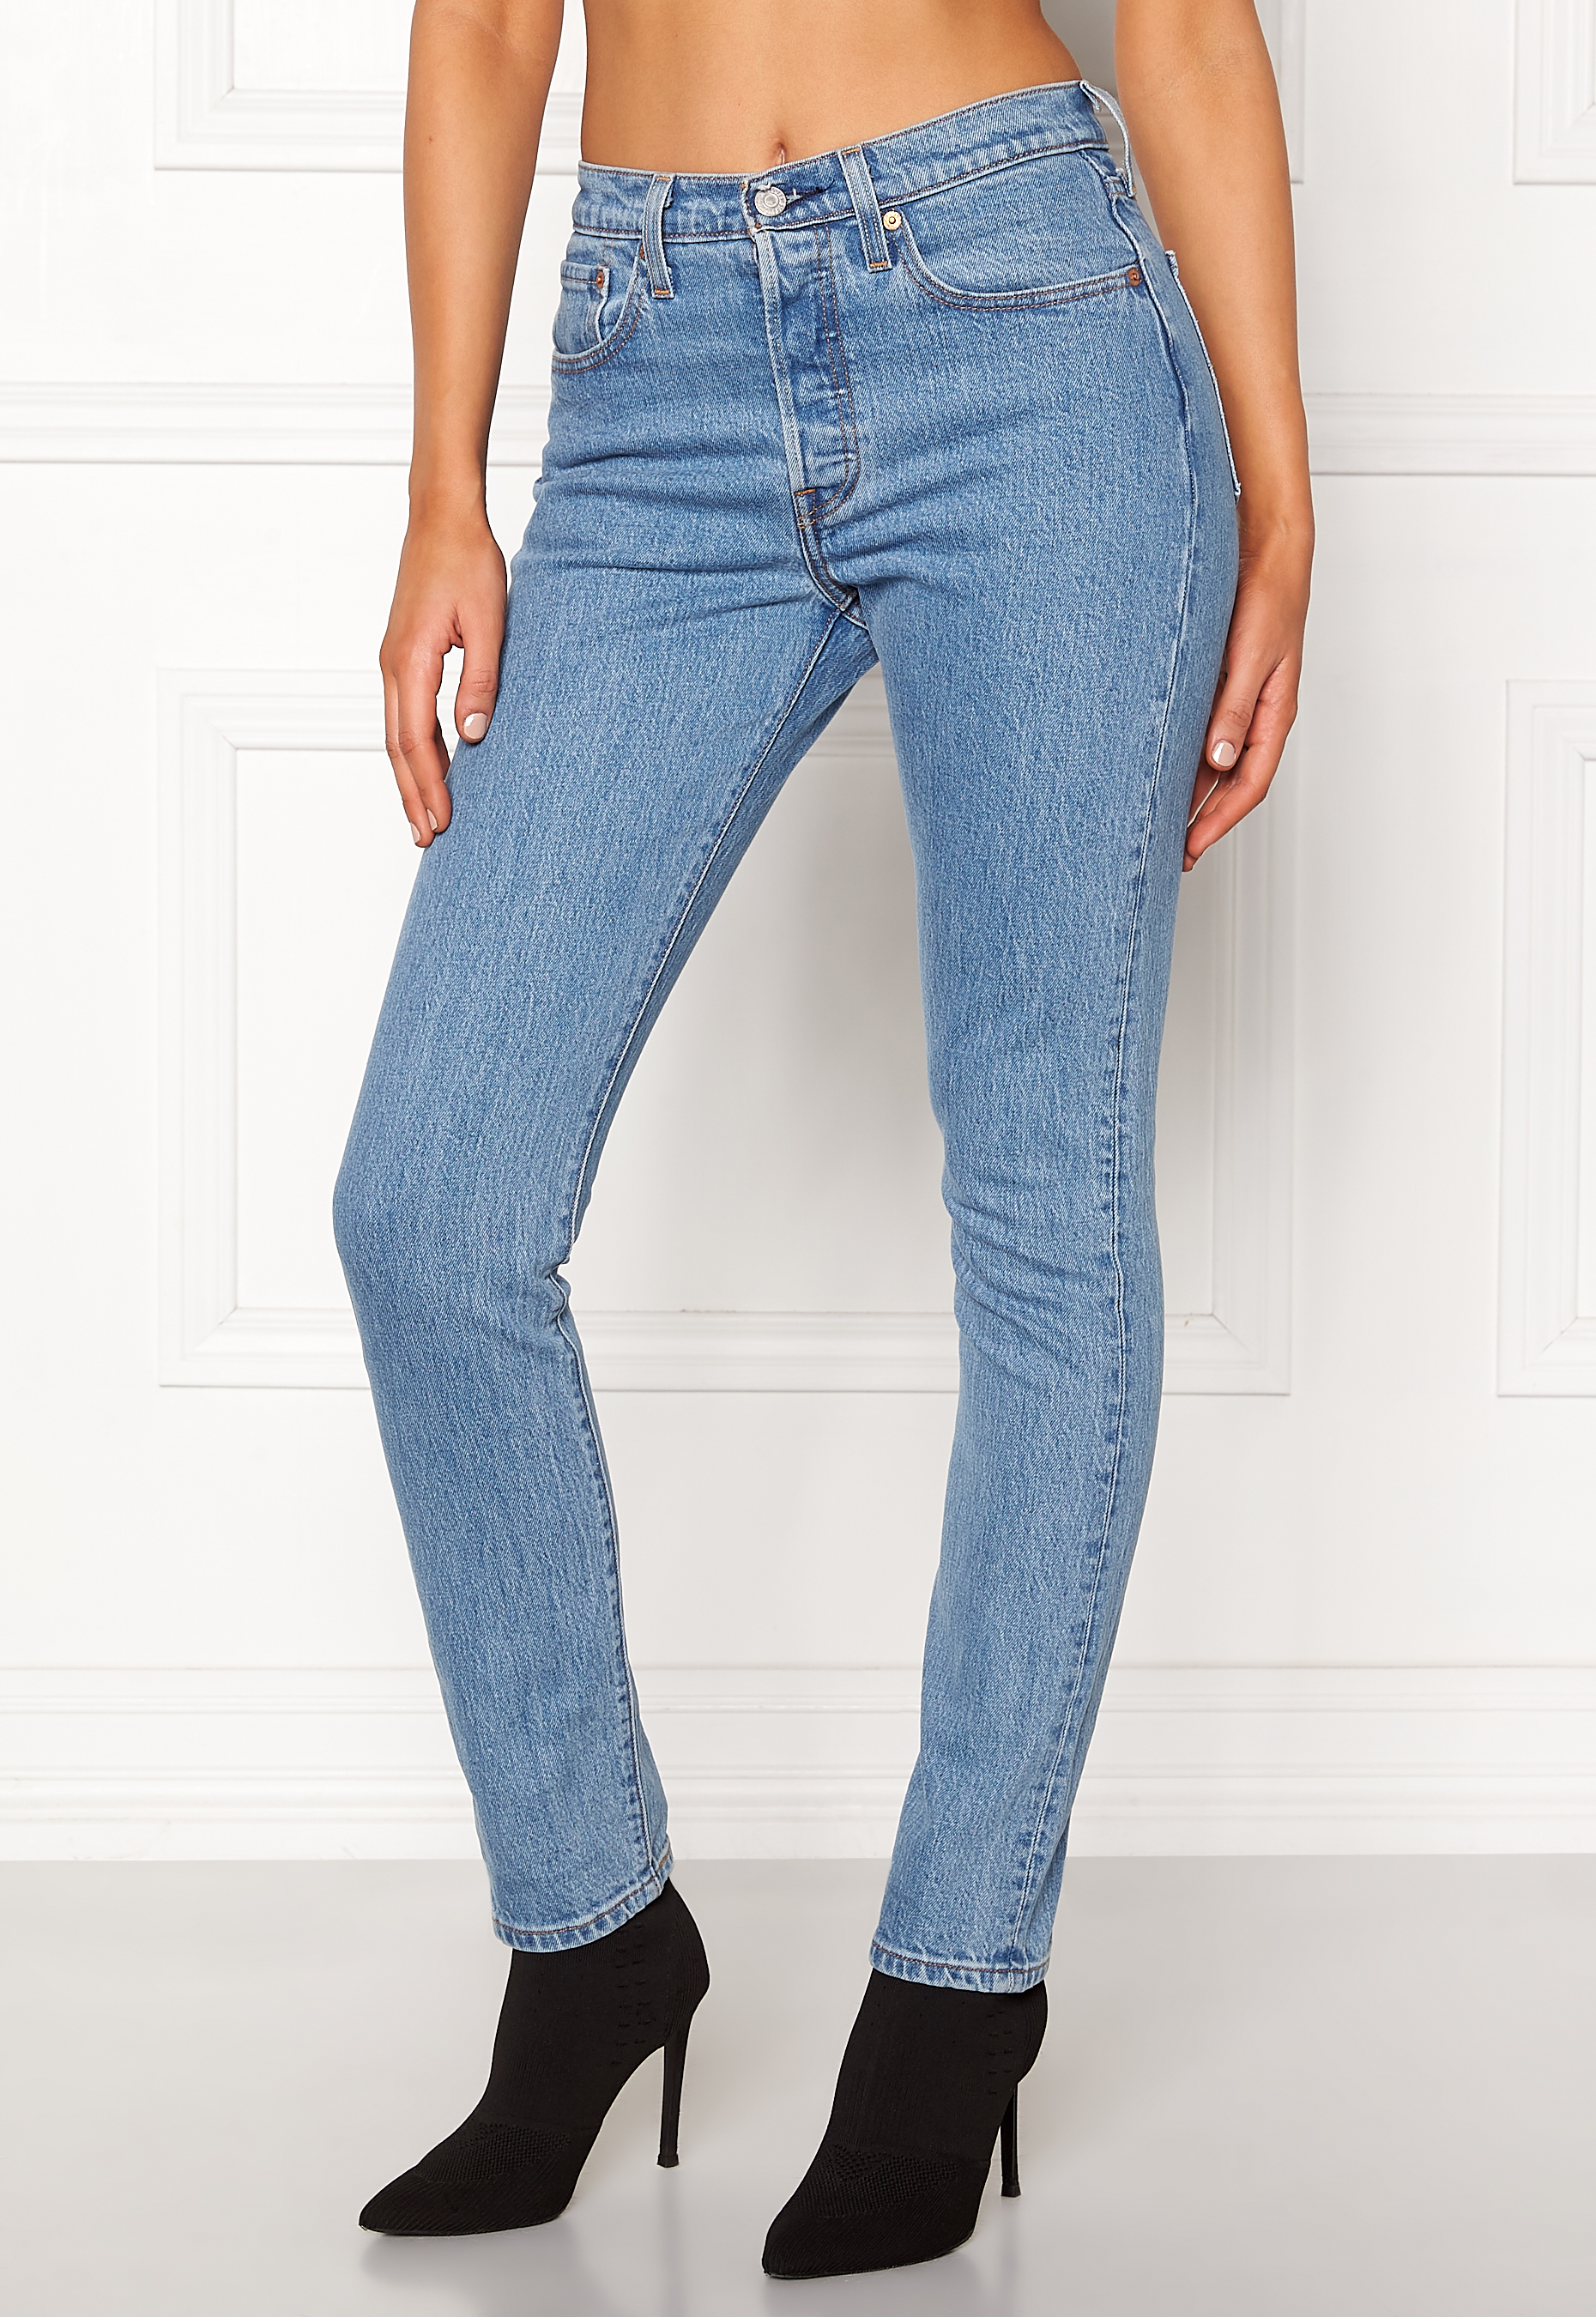 levi's 501 skinny jeans chill pill